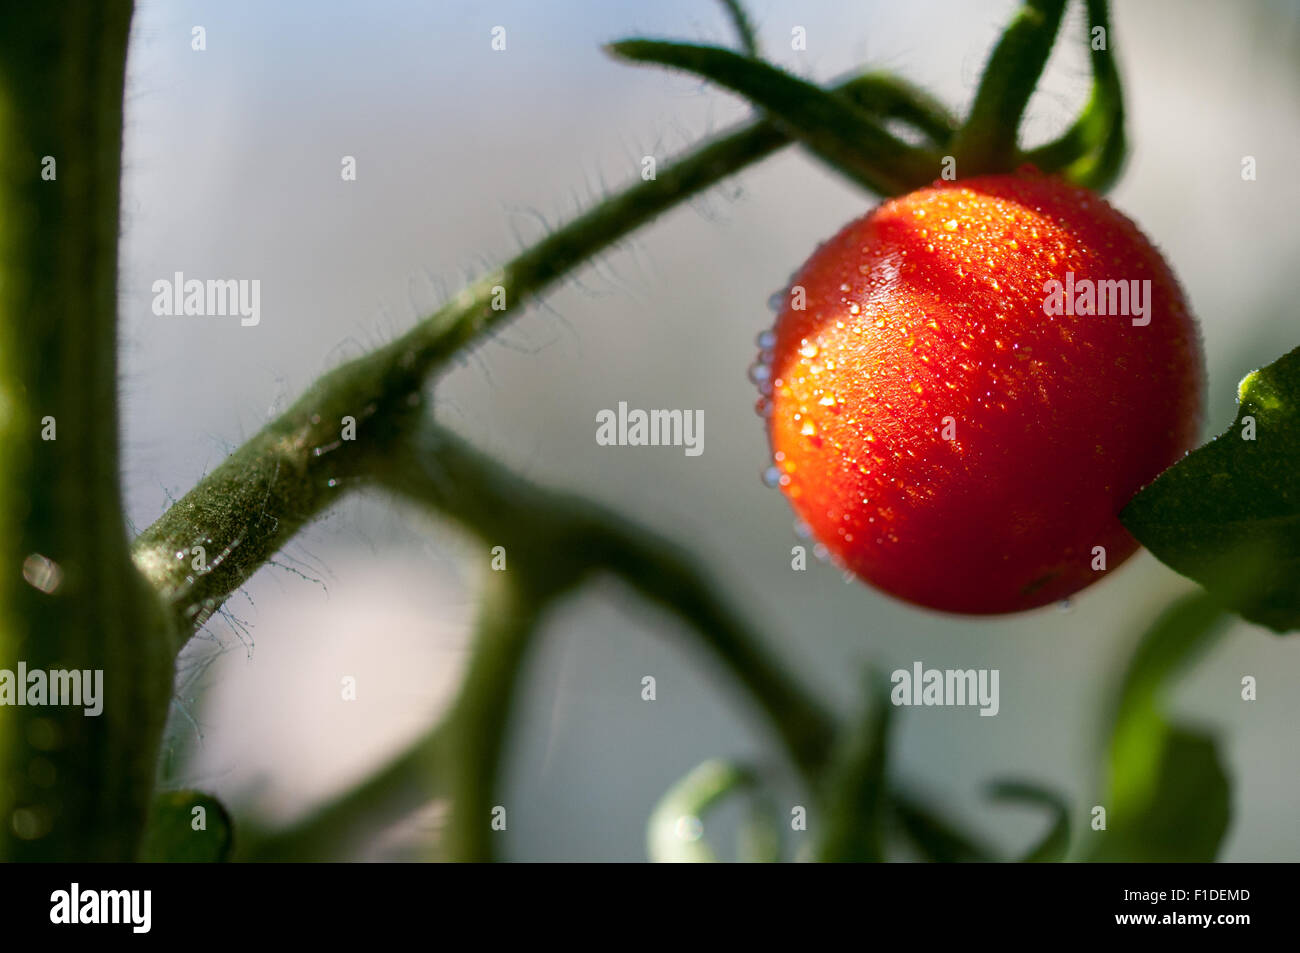 Sweet aperitif red tomato Solanum lycopersicum L.ripening in the greenhouse at the London allotment, England. Stock Photo